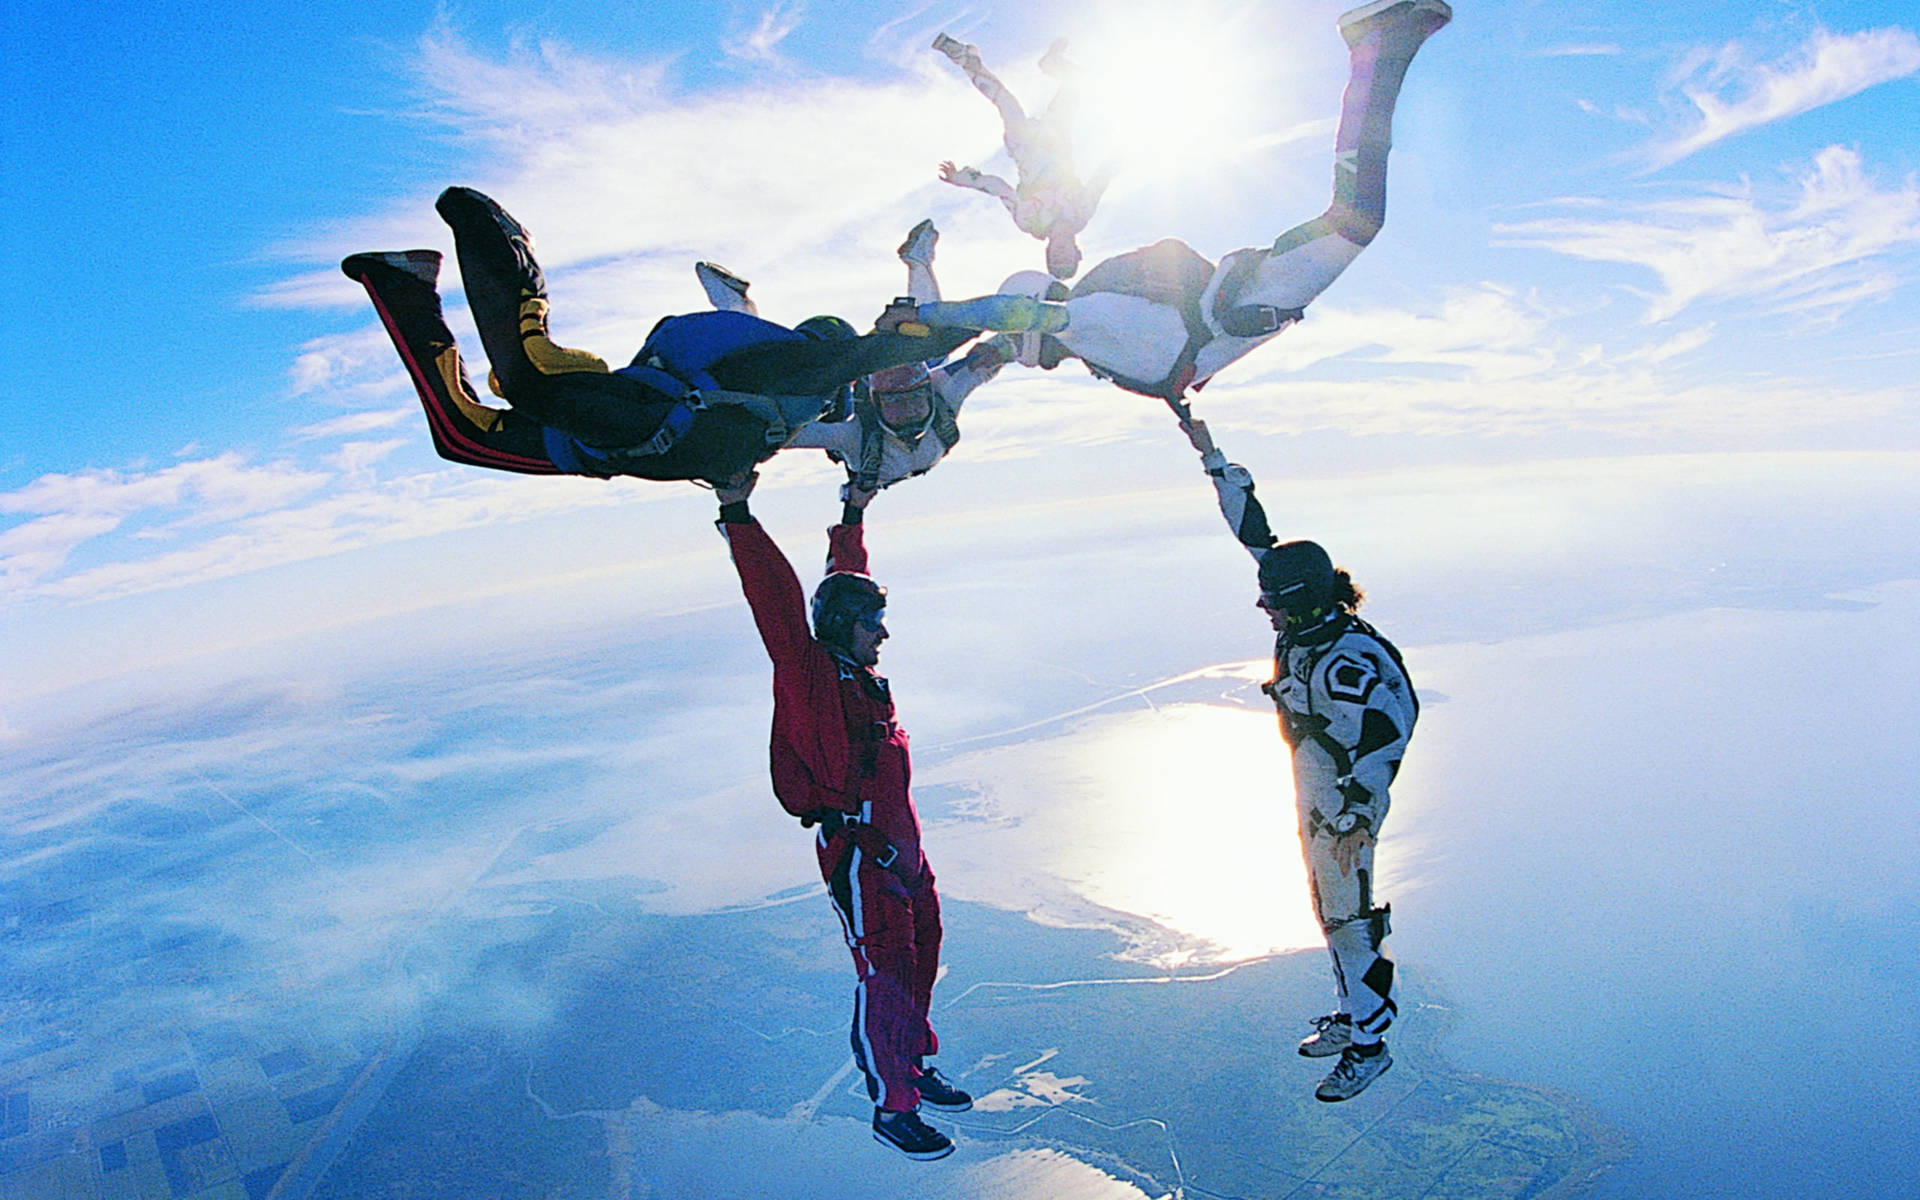 Skydiving and Other Extreme Sports